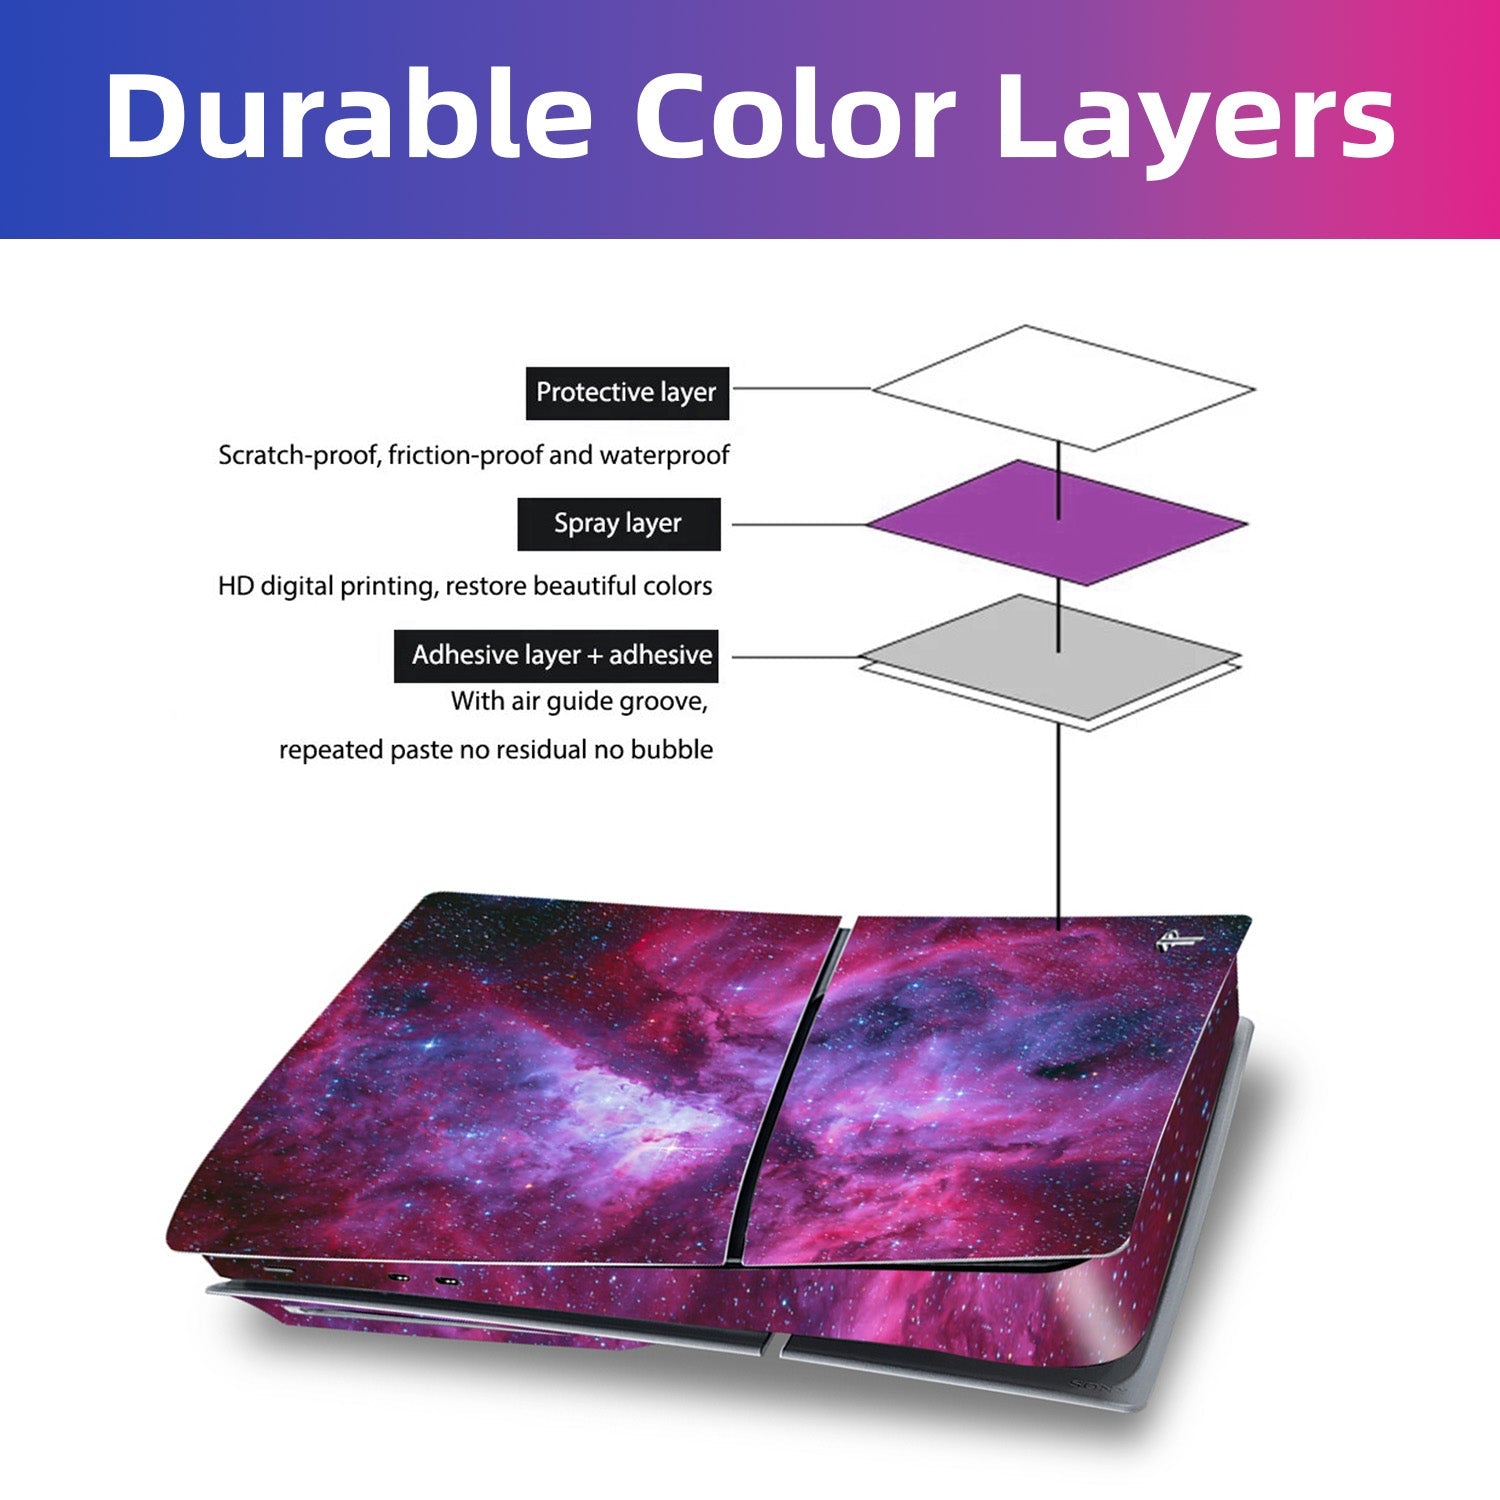 Durable Vinyl Decal Easy Apply Style Wrap Stickers for PS5 Slim Disc Version - Cosmic Galaxy